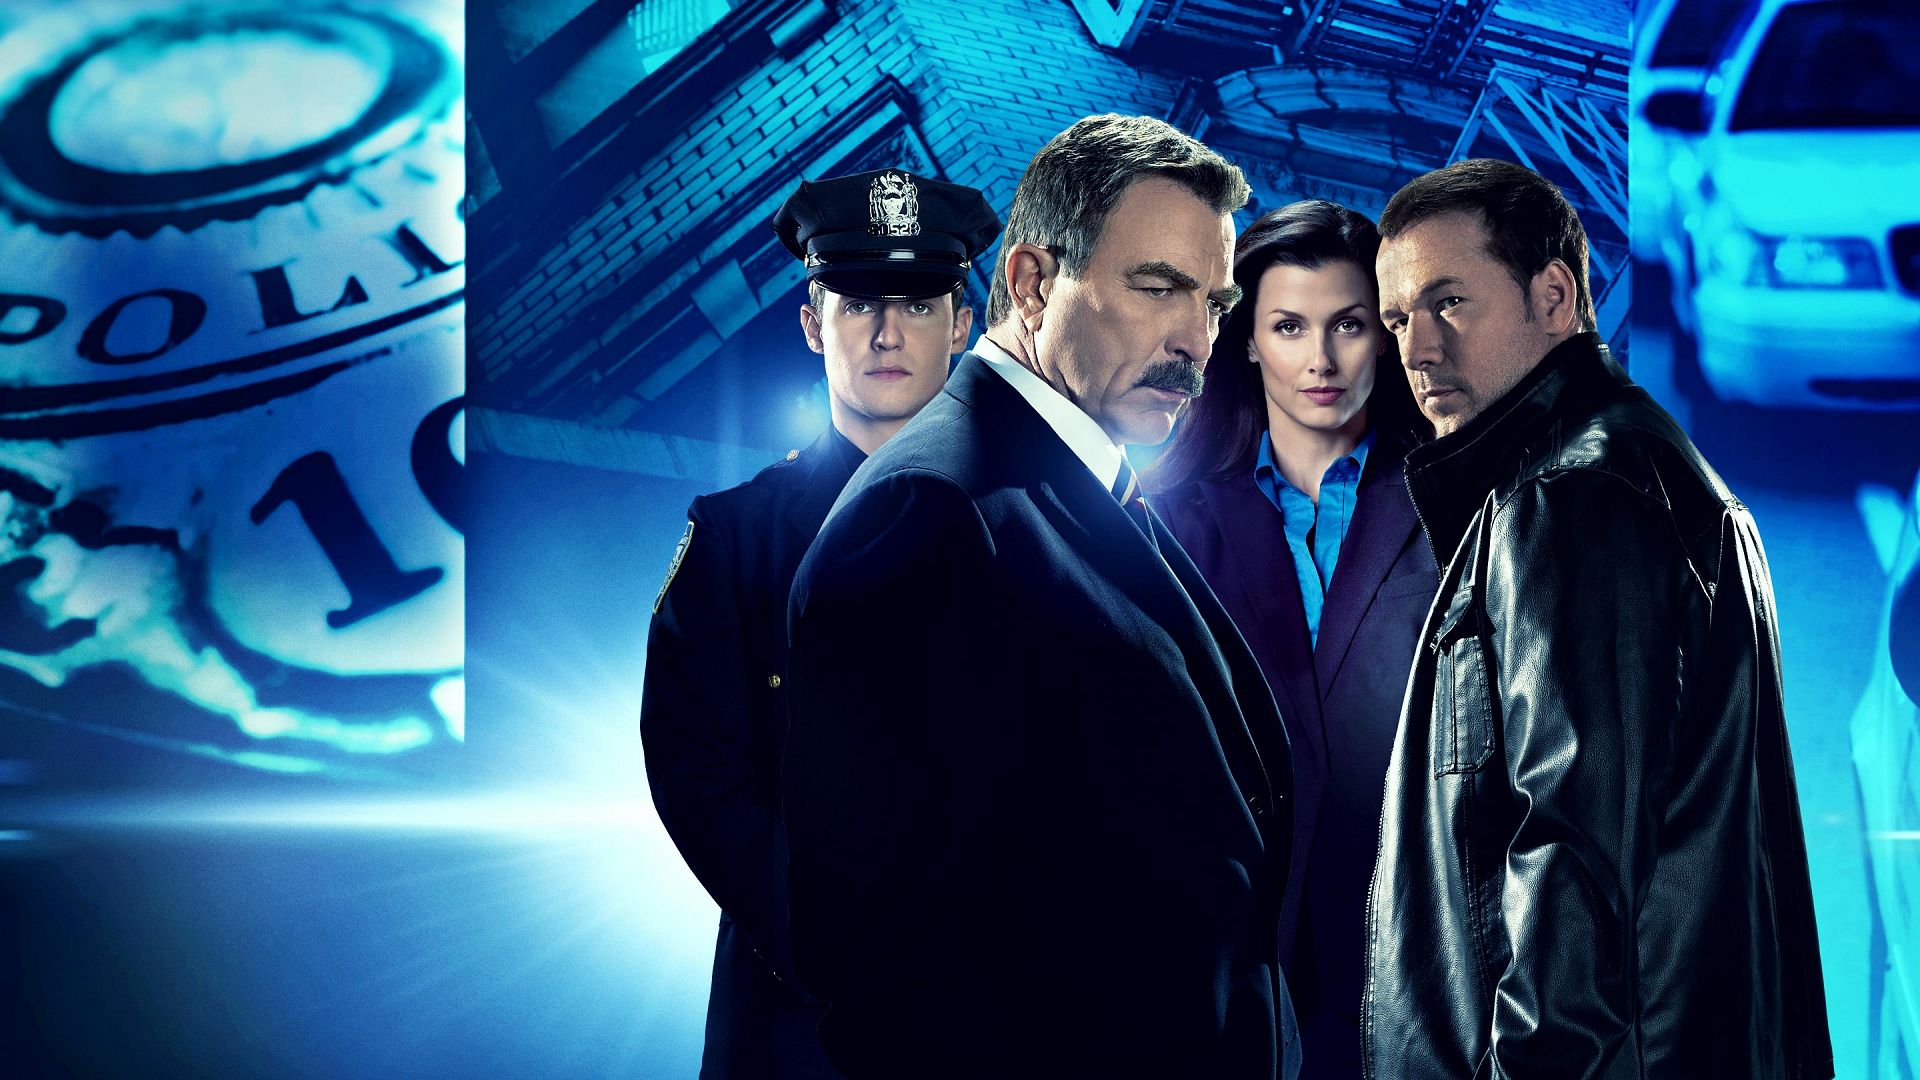 Blue Bloods Season 10: Air Date, Cast, Donnie Wahlberg Not Returning?